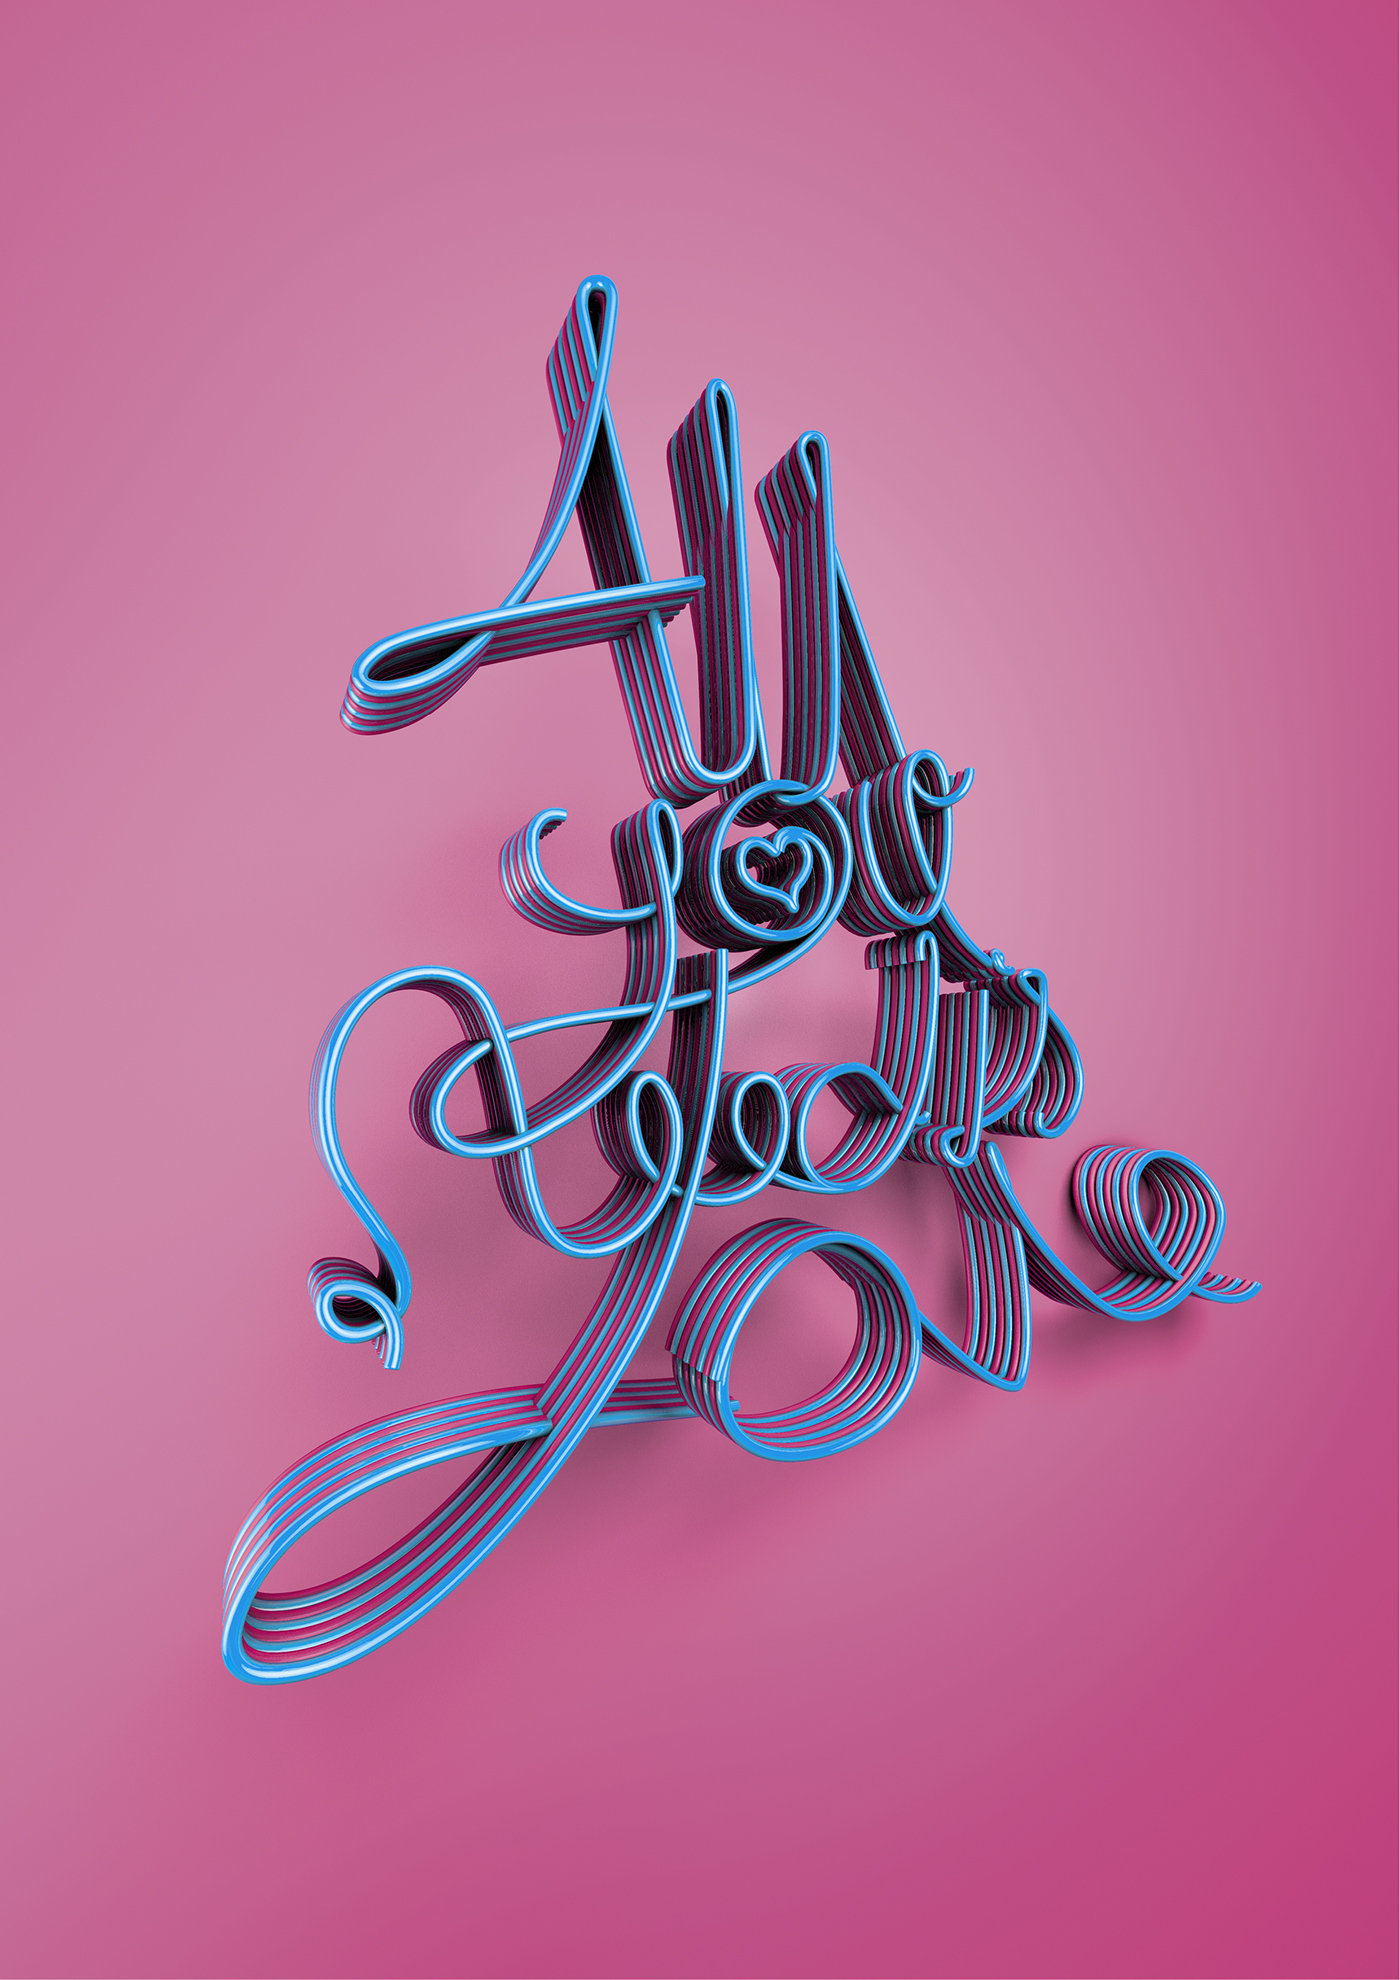 Love type letters flowing text Beatles hand written colour